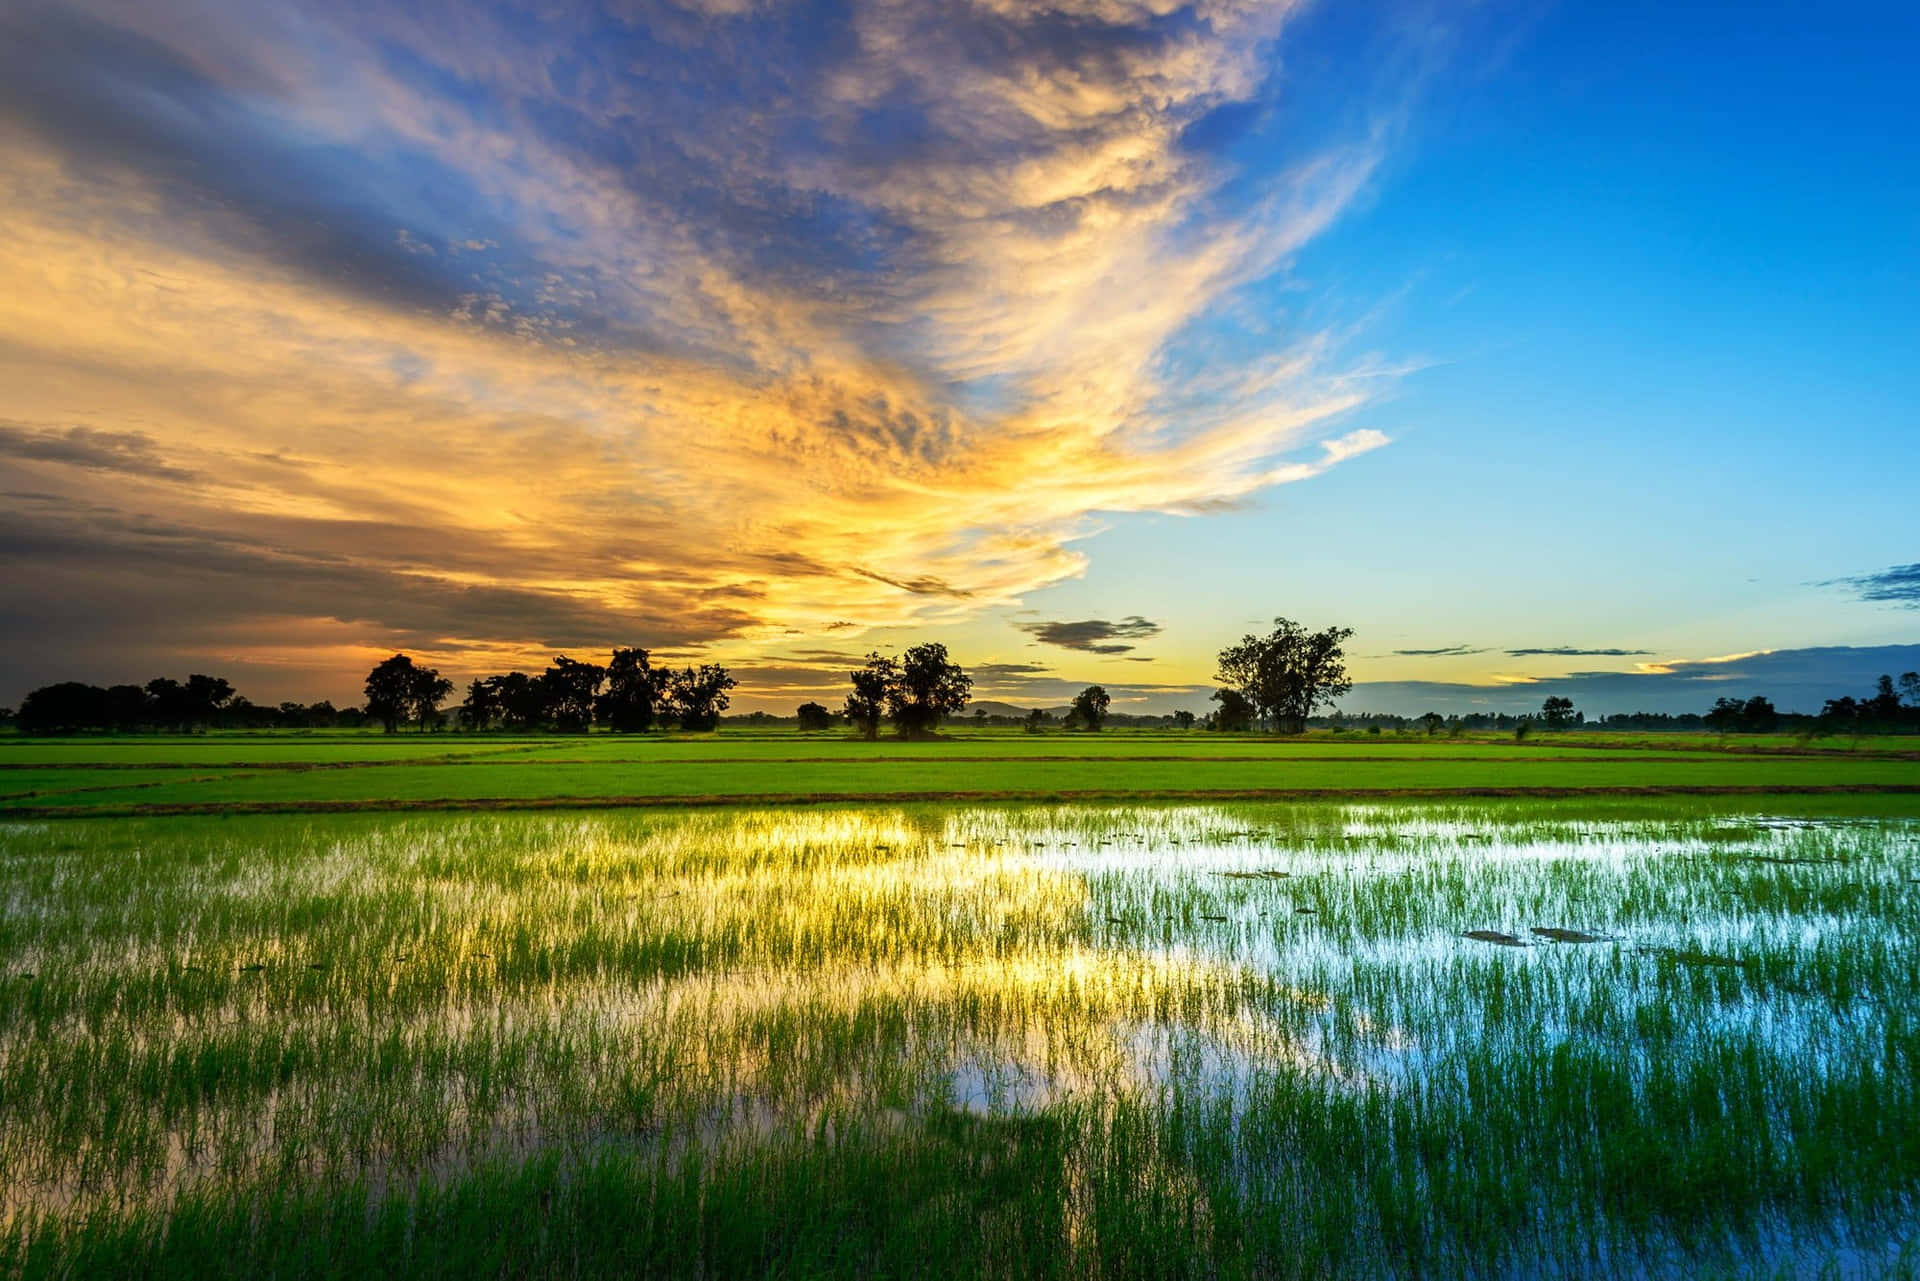 A Field Of Rice With A Beautiful Sunset